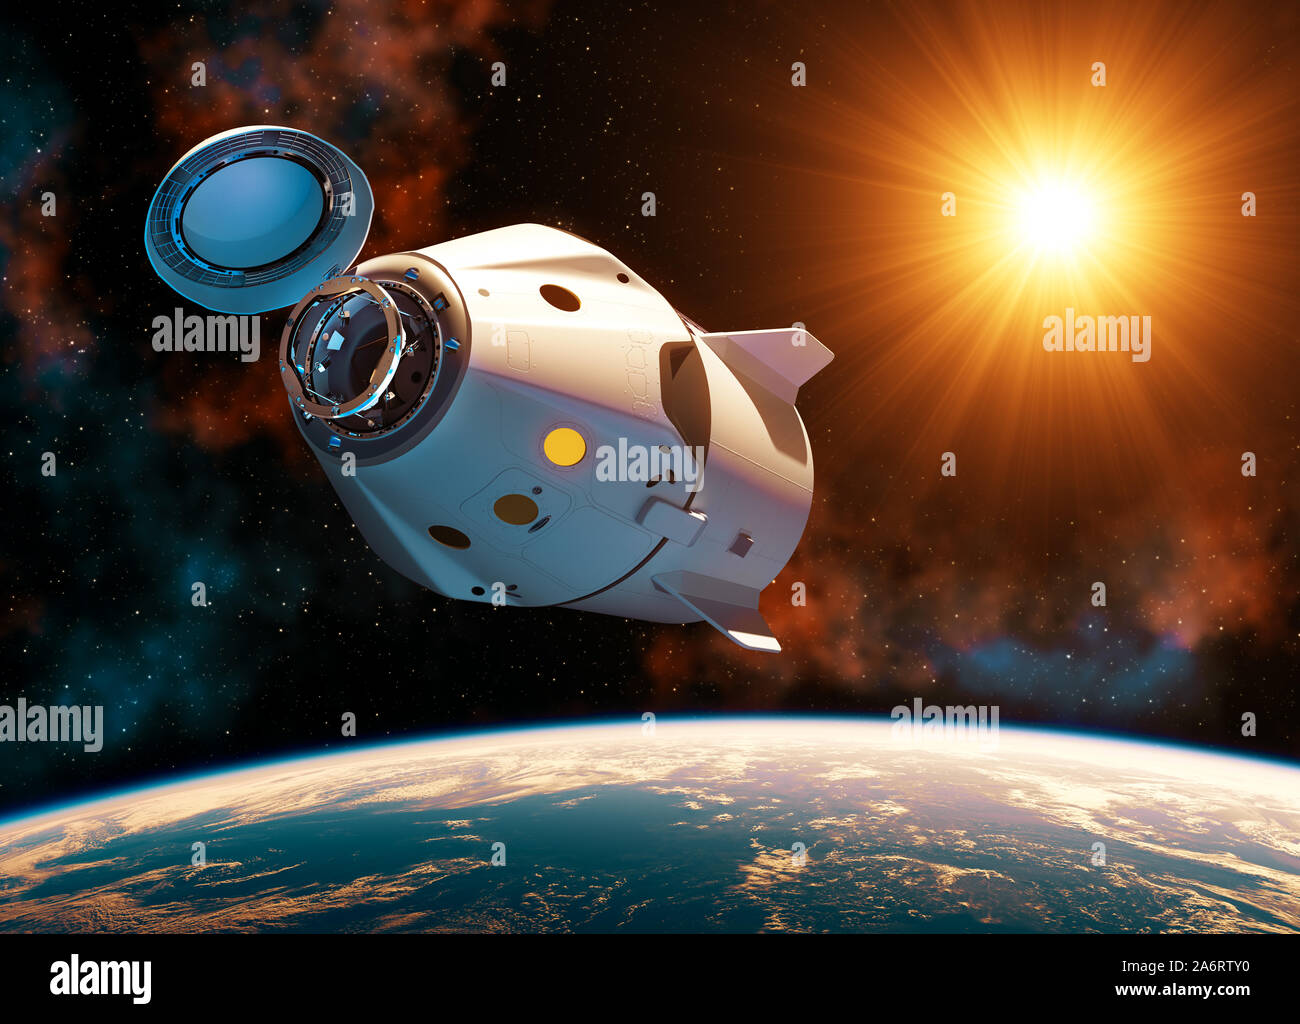 Commercial Spacecraft With Open Docking Hatch In The Rays Of Sun. 3D Illustration. Stock Photo